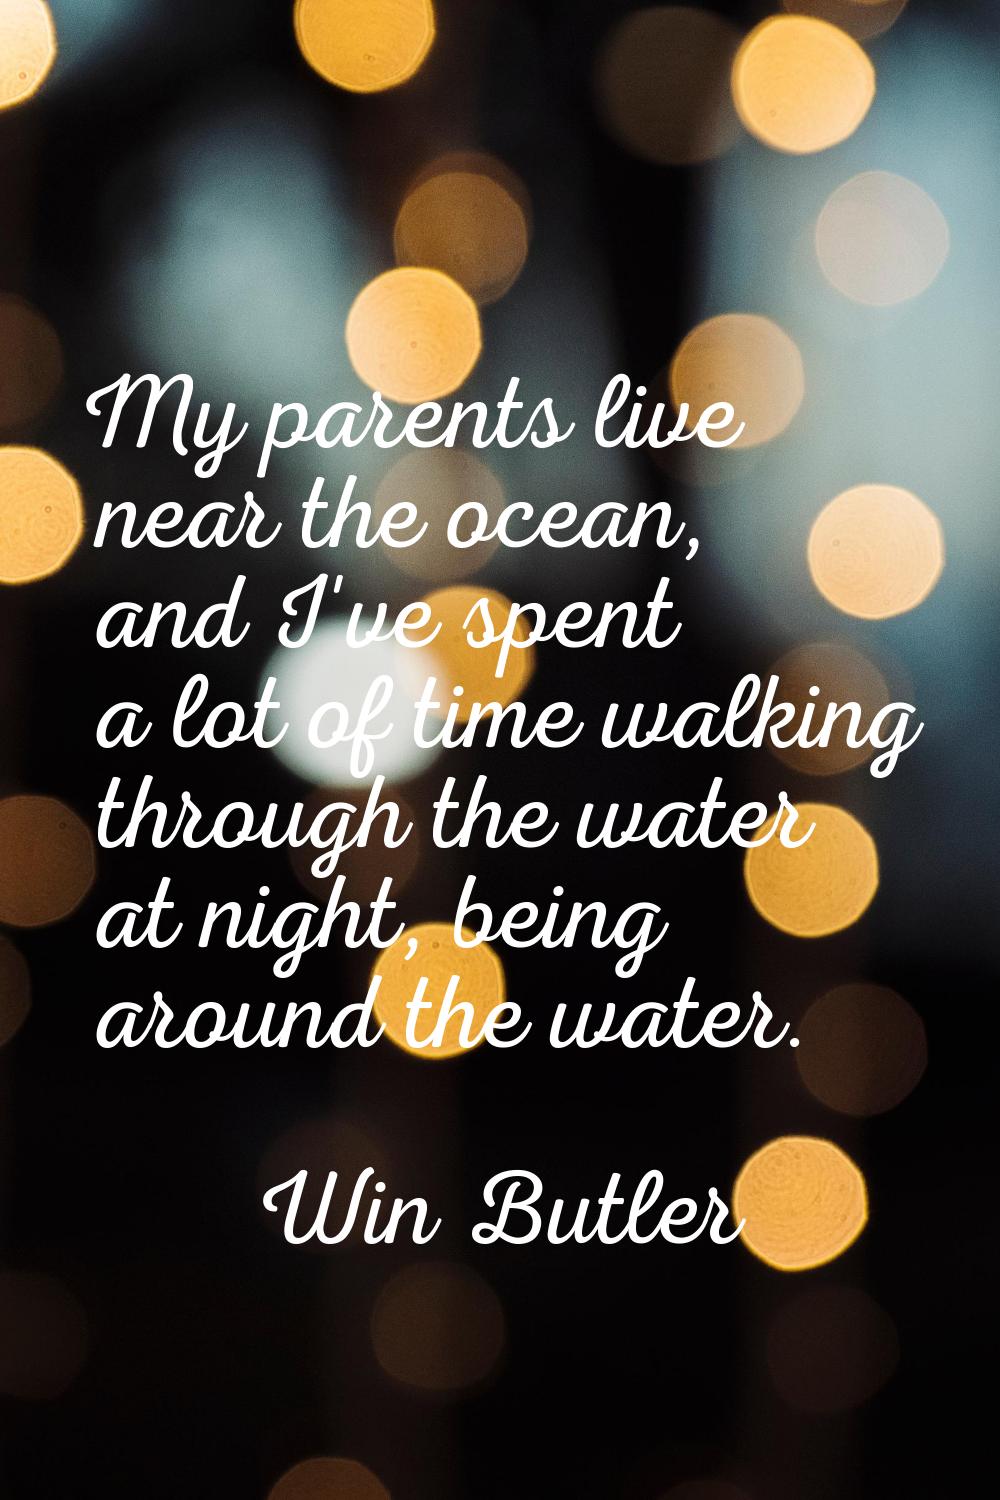 My parents live near the ocean, and I've spent a lot of time walking through the water at night, be